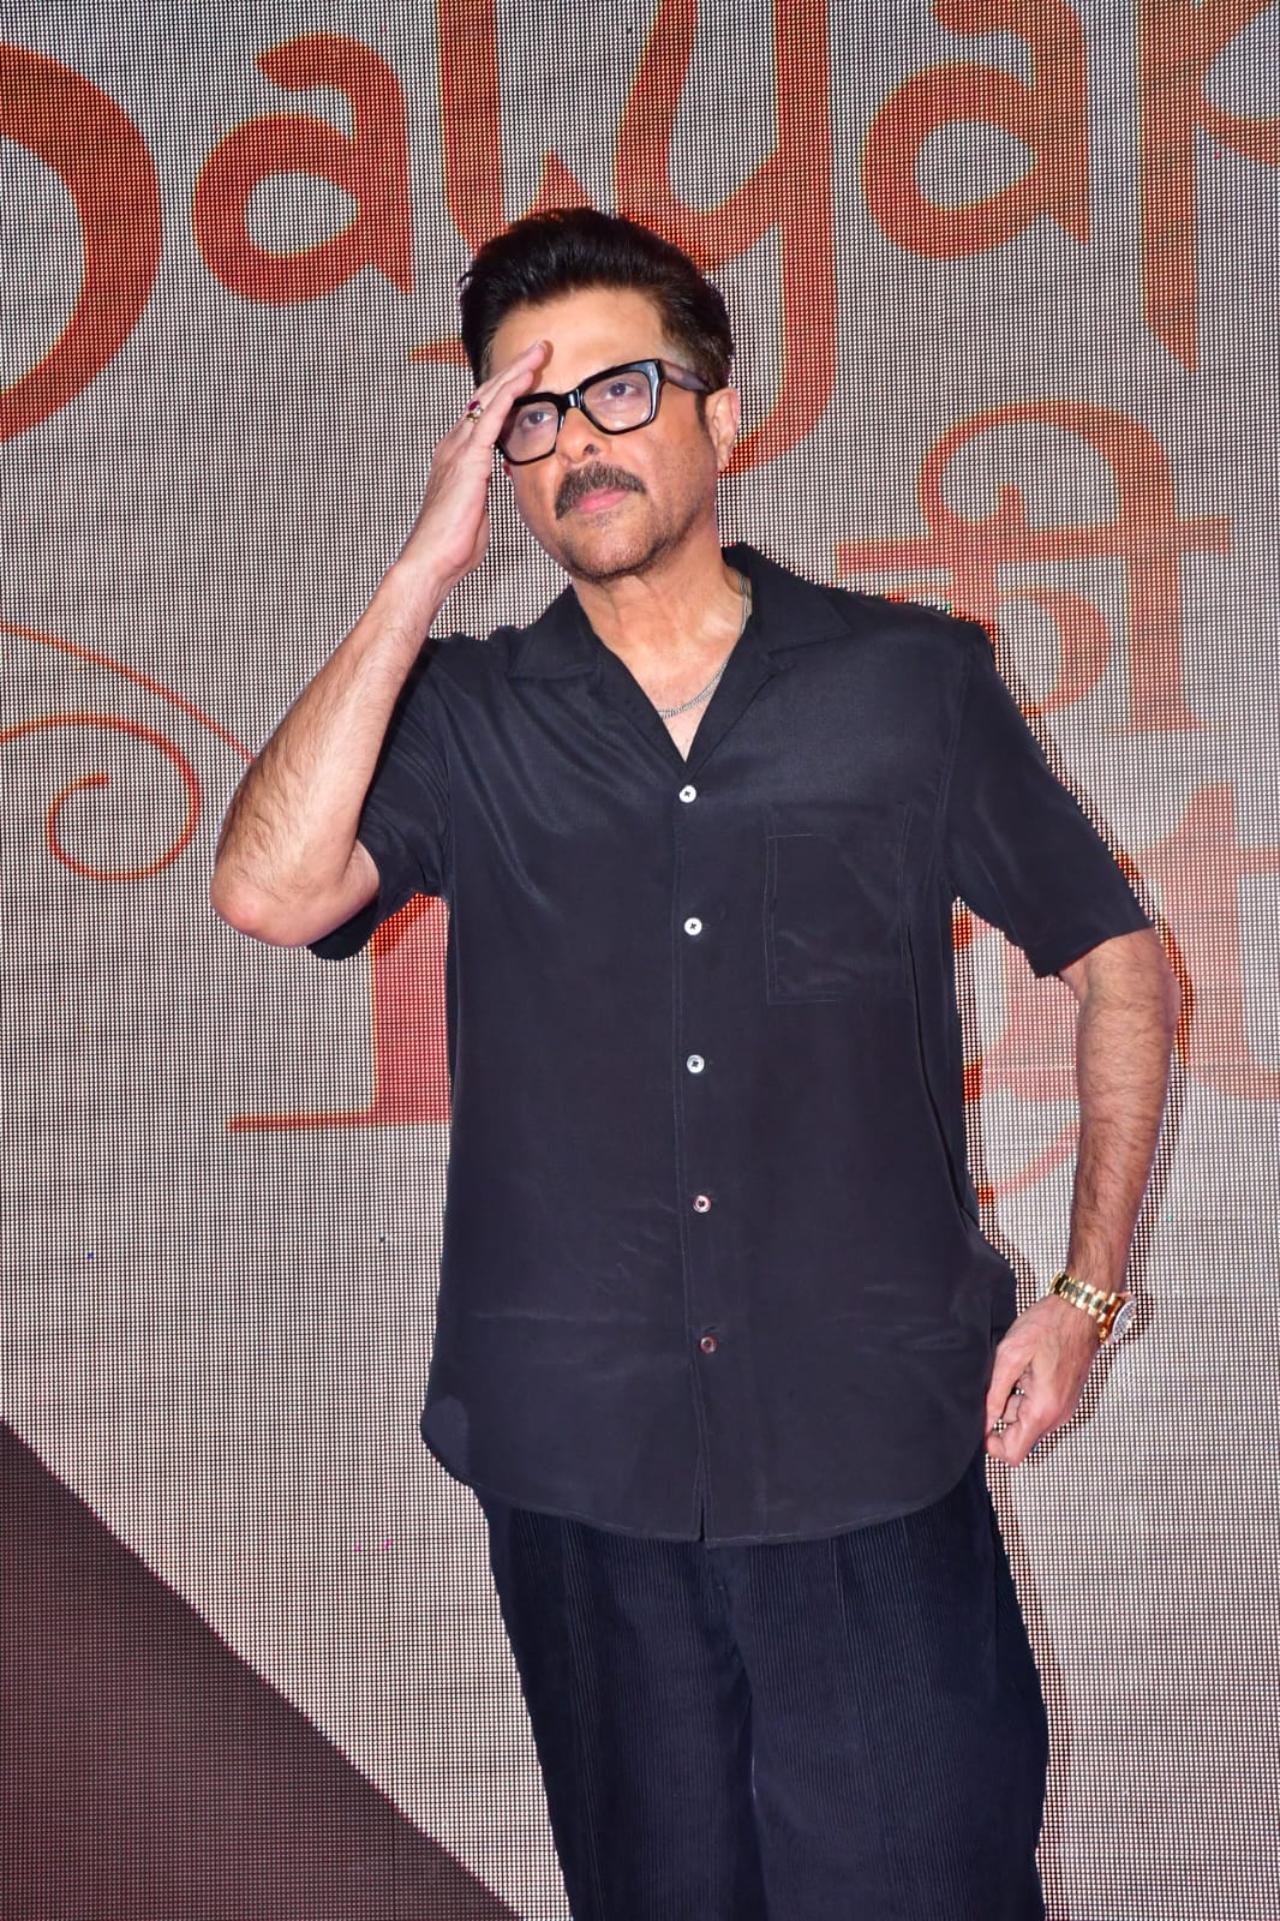 Anil Kapoor greeted the paps with a salute as he arrived for the screening dressed in an all-black outfit